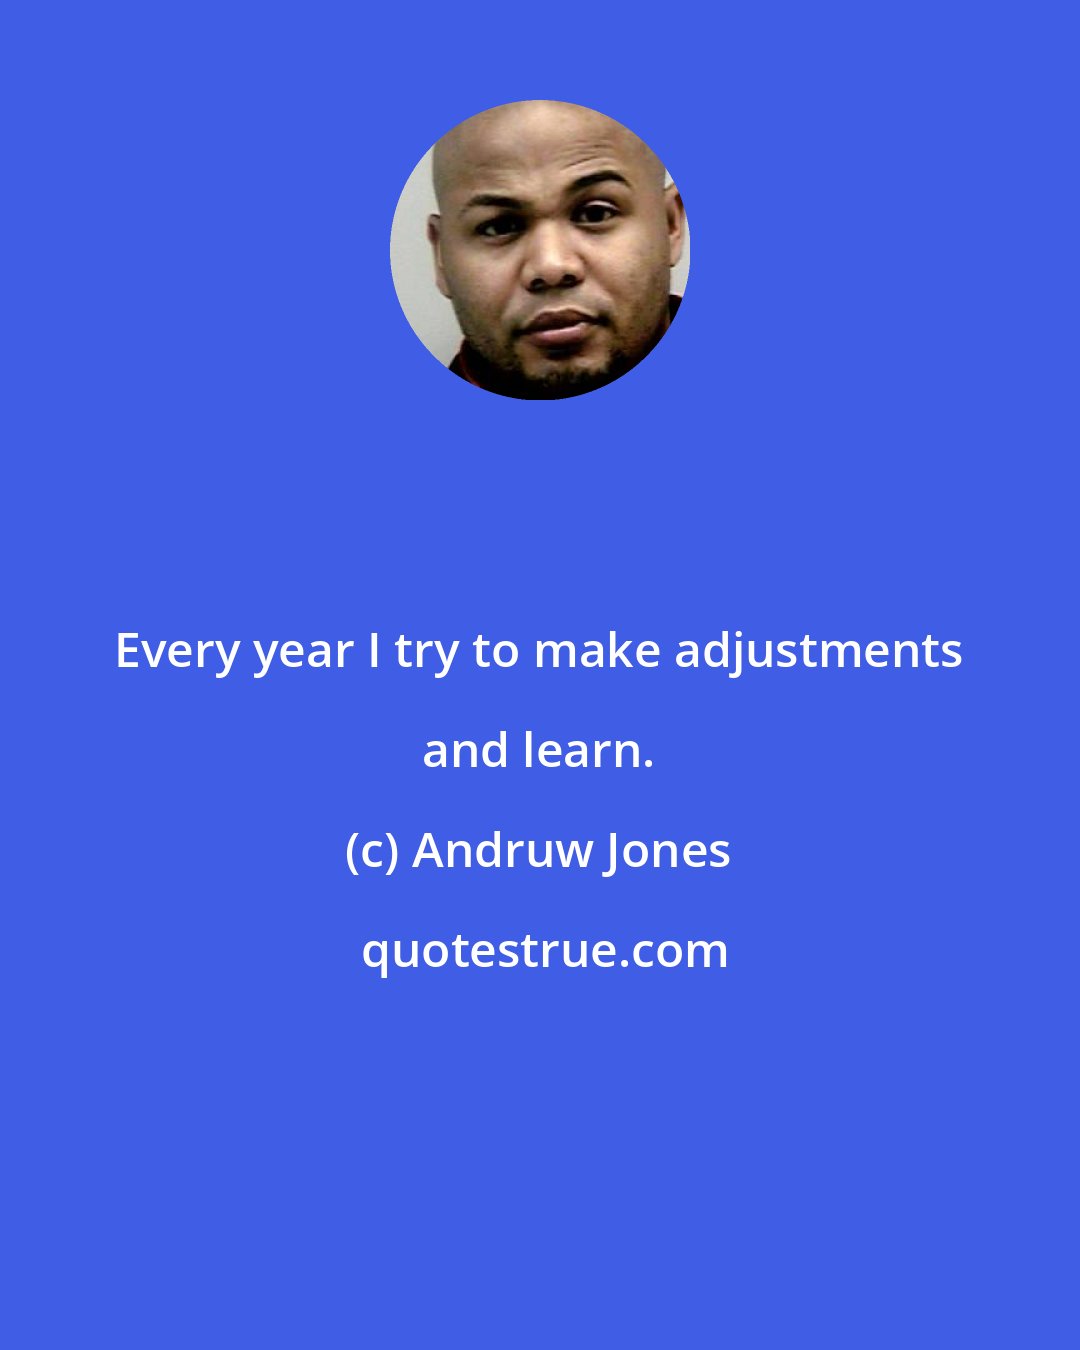 Andruw Jones: Every year I try to make adjustments and learn.